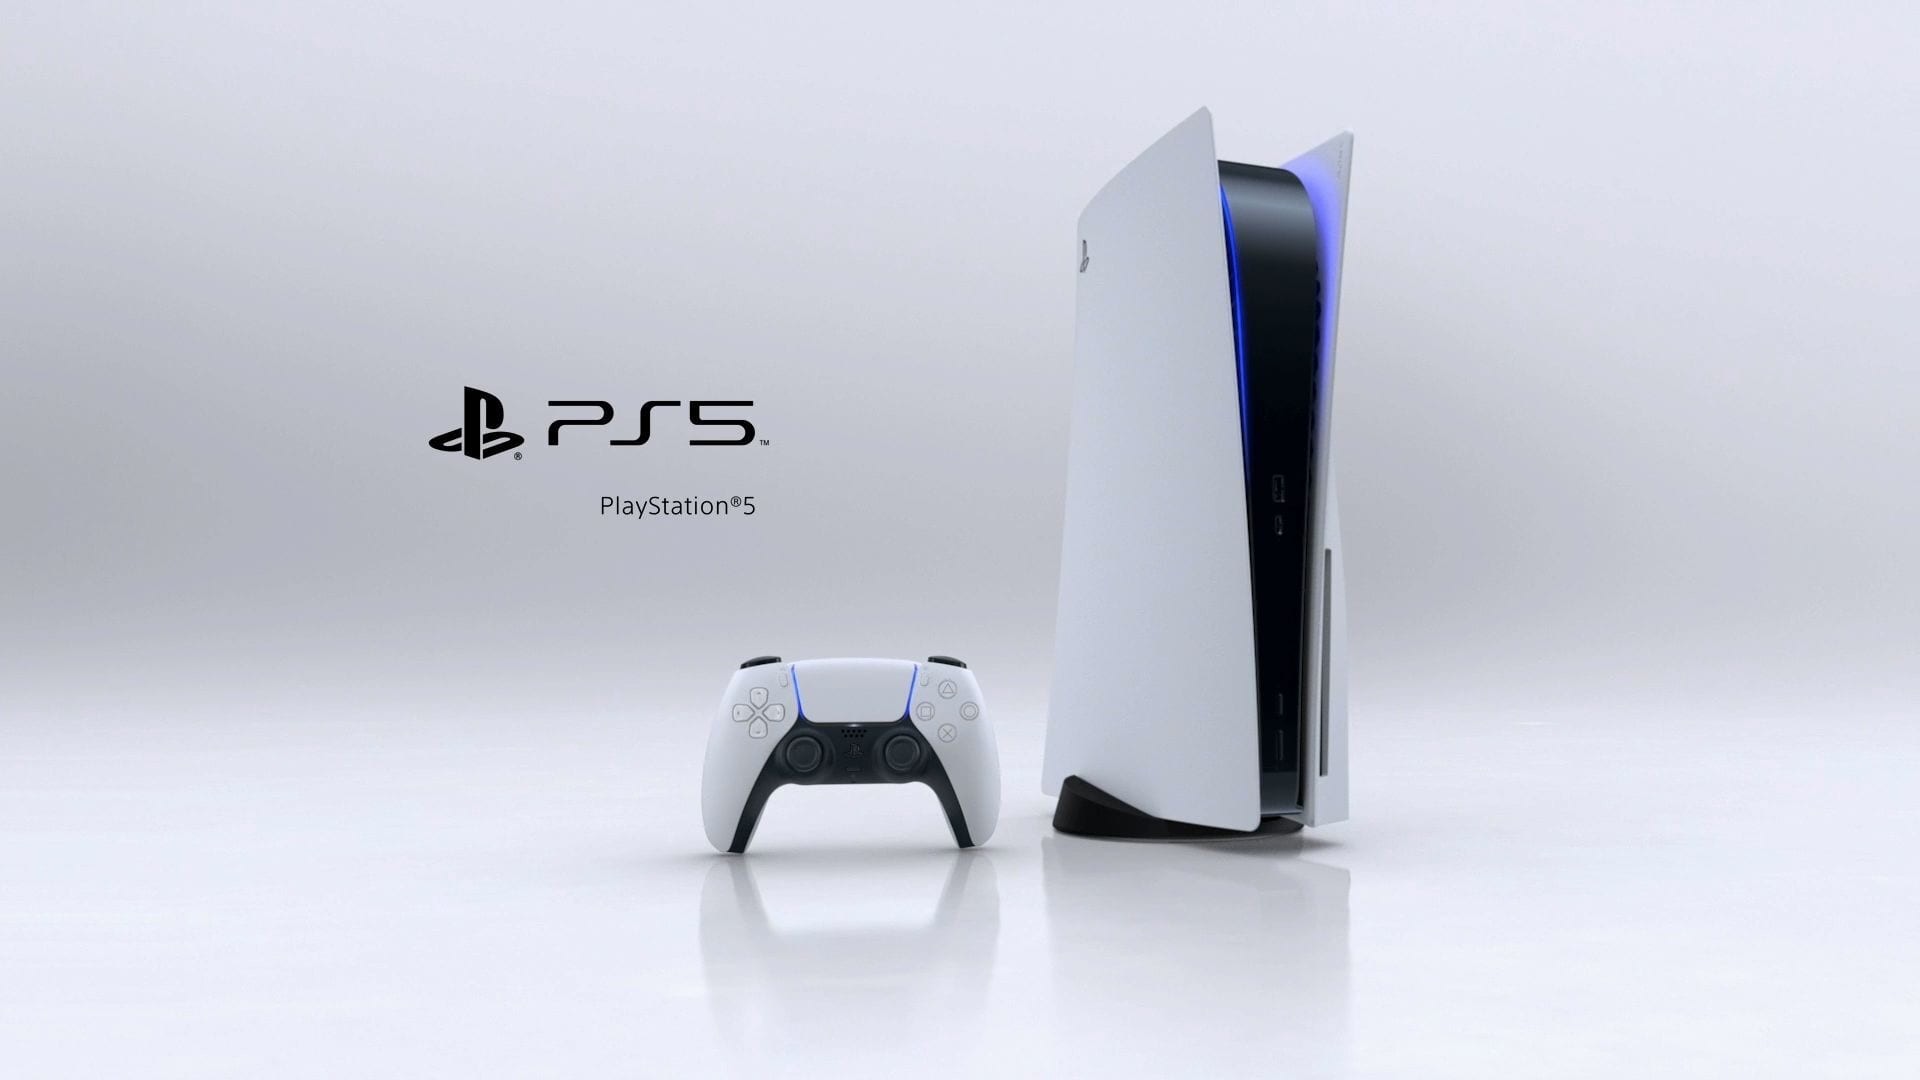 PlayStation 5 with disc drive